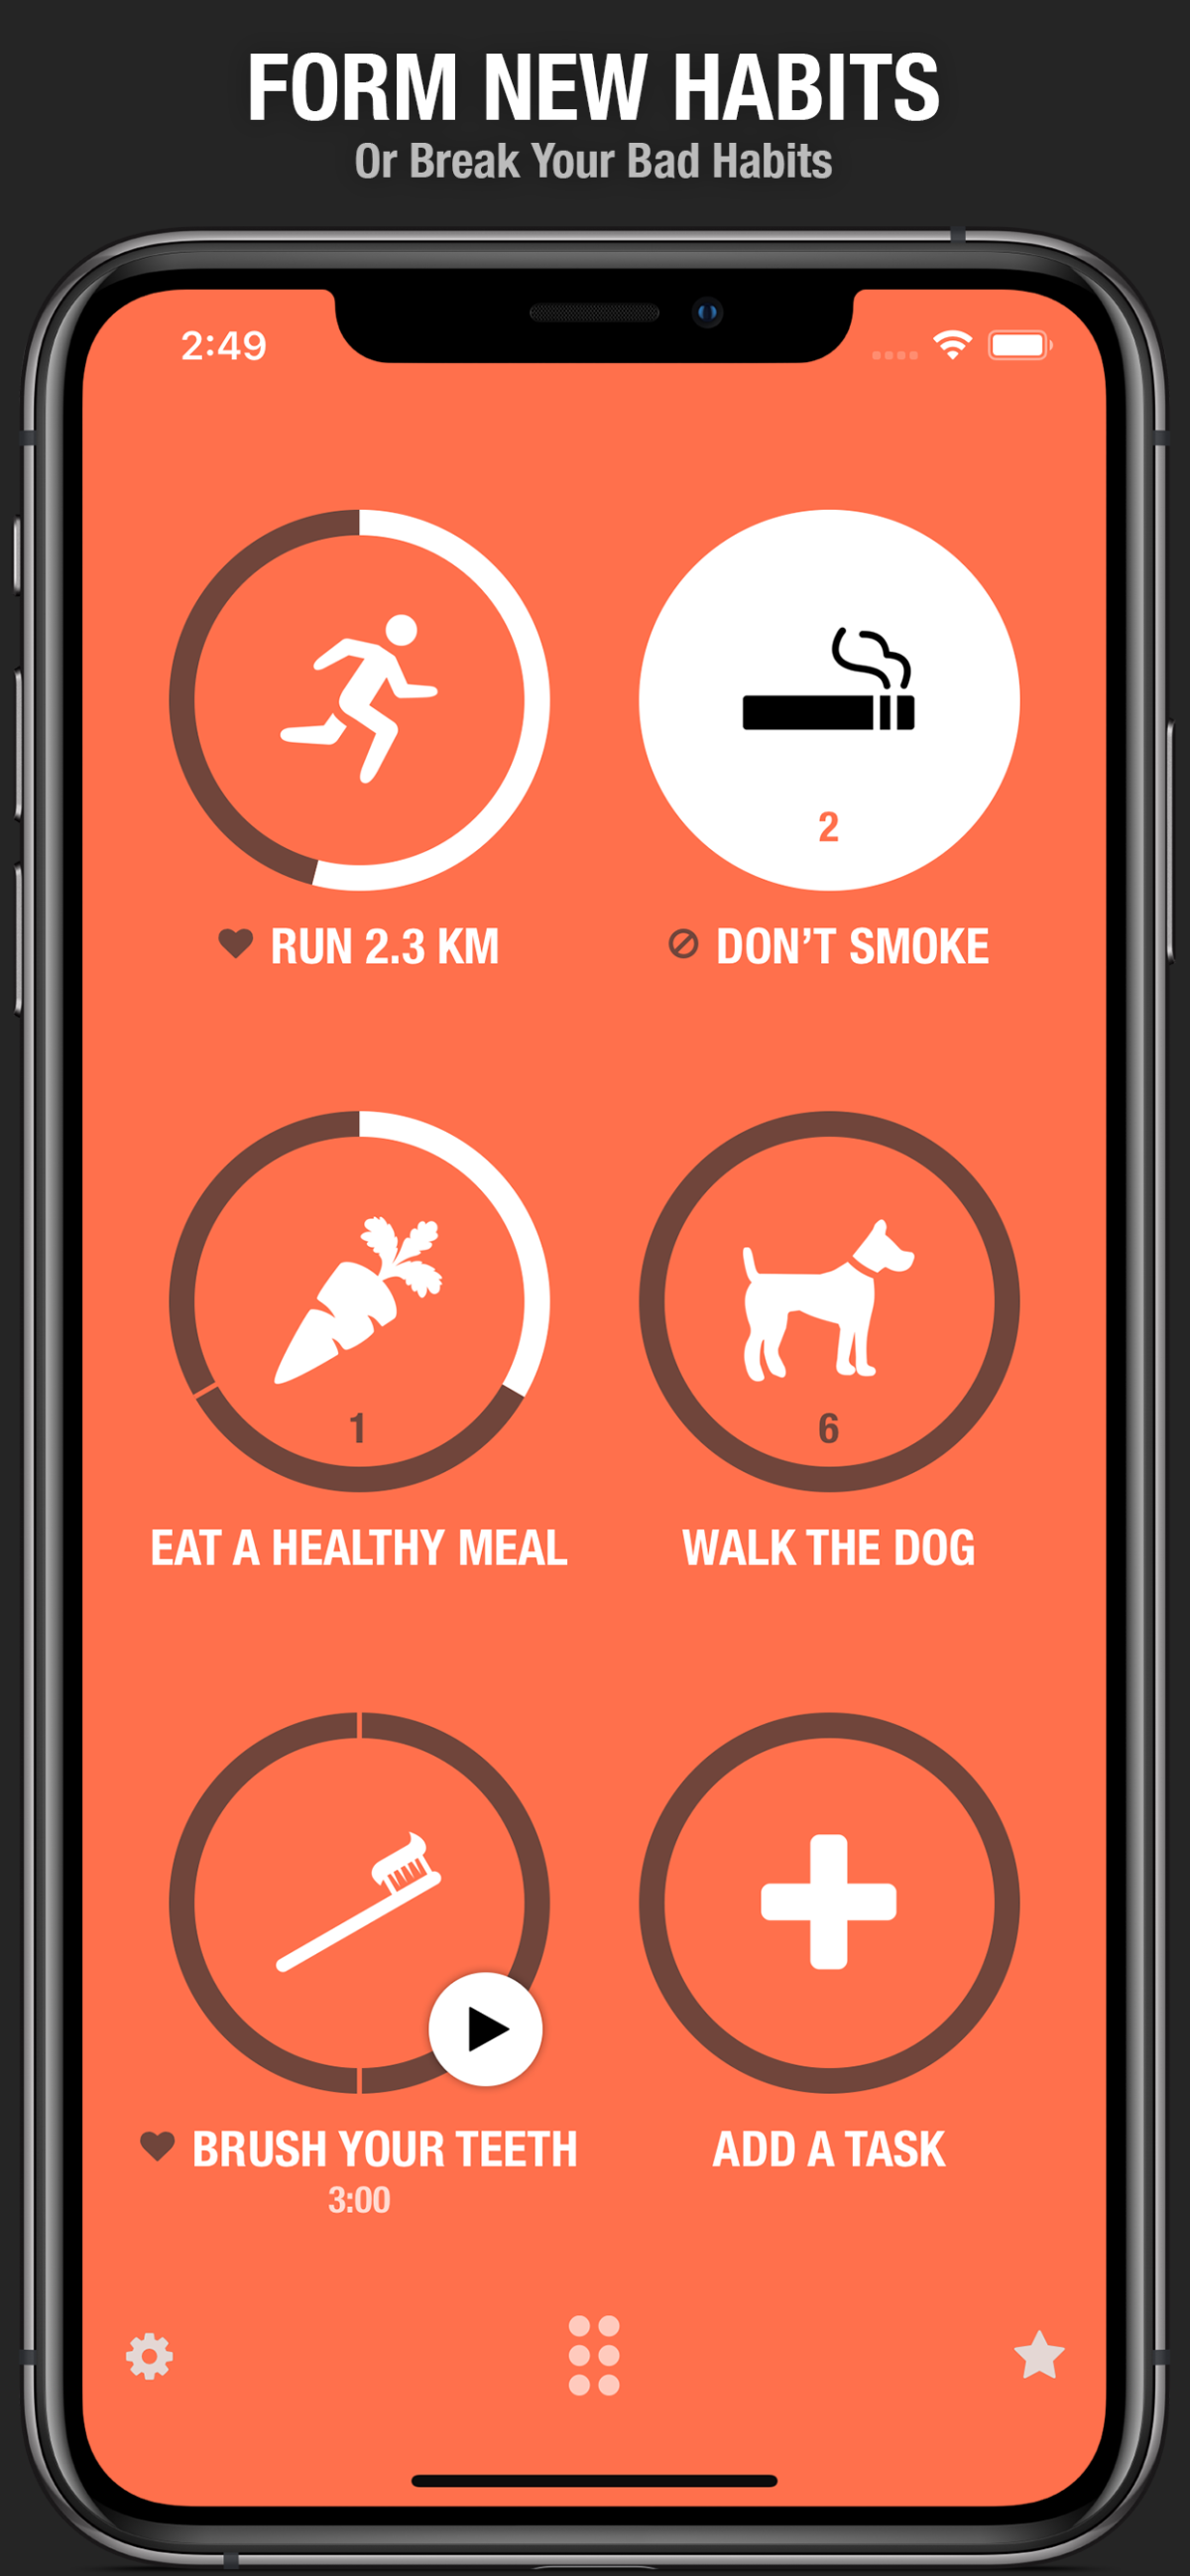 The Streaks app helps you stay on task and build new habits.